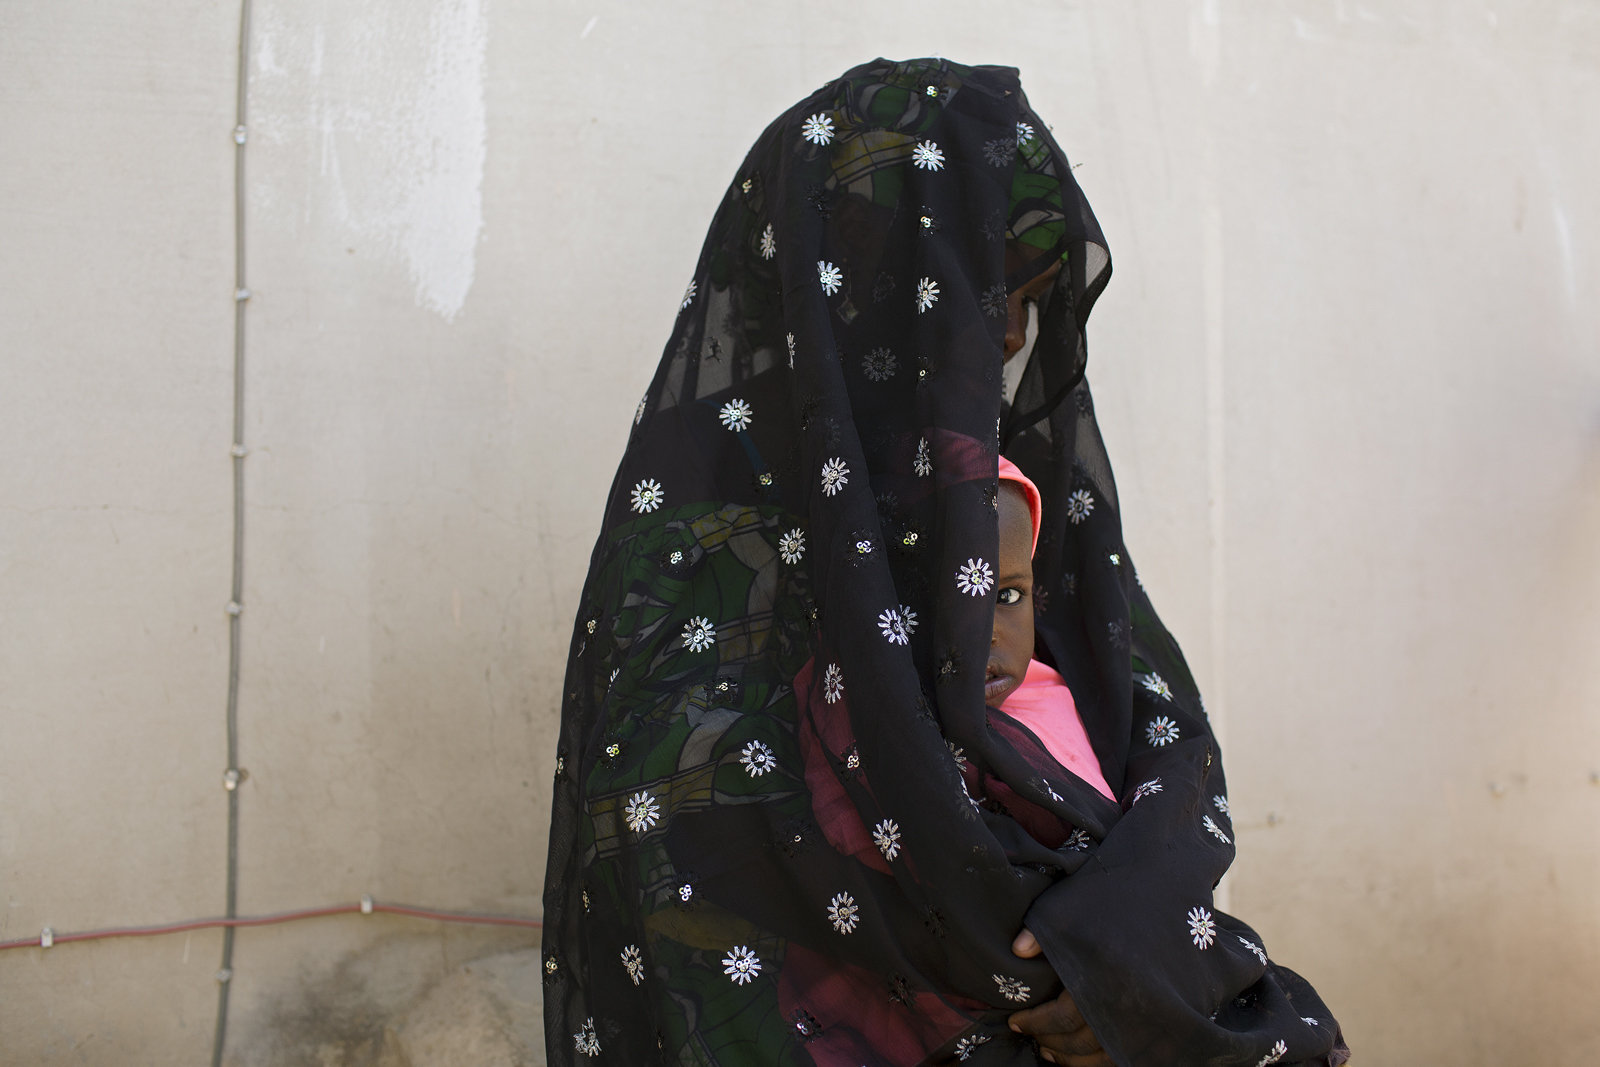 Zara, 19, was forced to move to Boko Haram's headquarter in Sambisa forest after her husband joined the insurgents when their daughter was two months old. At one point during captivity she was impregnated by him but then later lost the baby because he beat her after she was quarreling with his other wife. After that incident, she demanded a divorce, which she was granted after imams attempted to exorcise devils out of her to no avail.